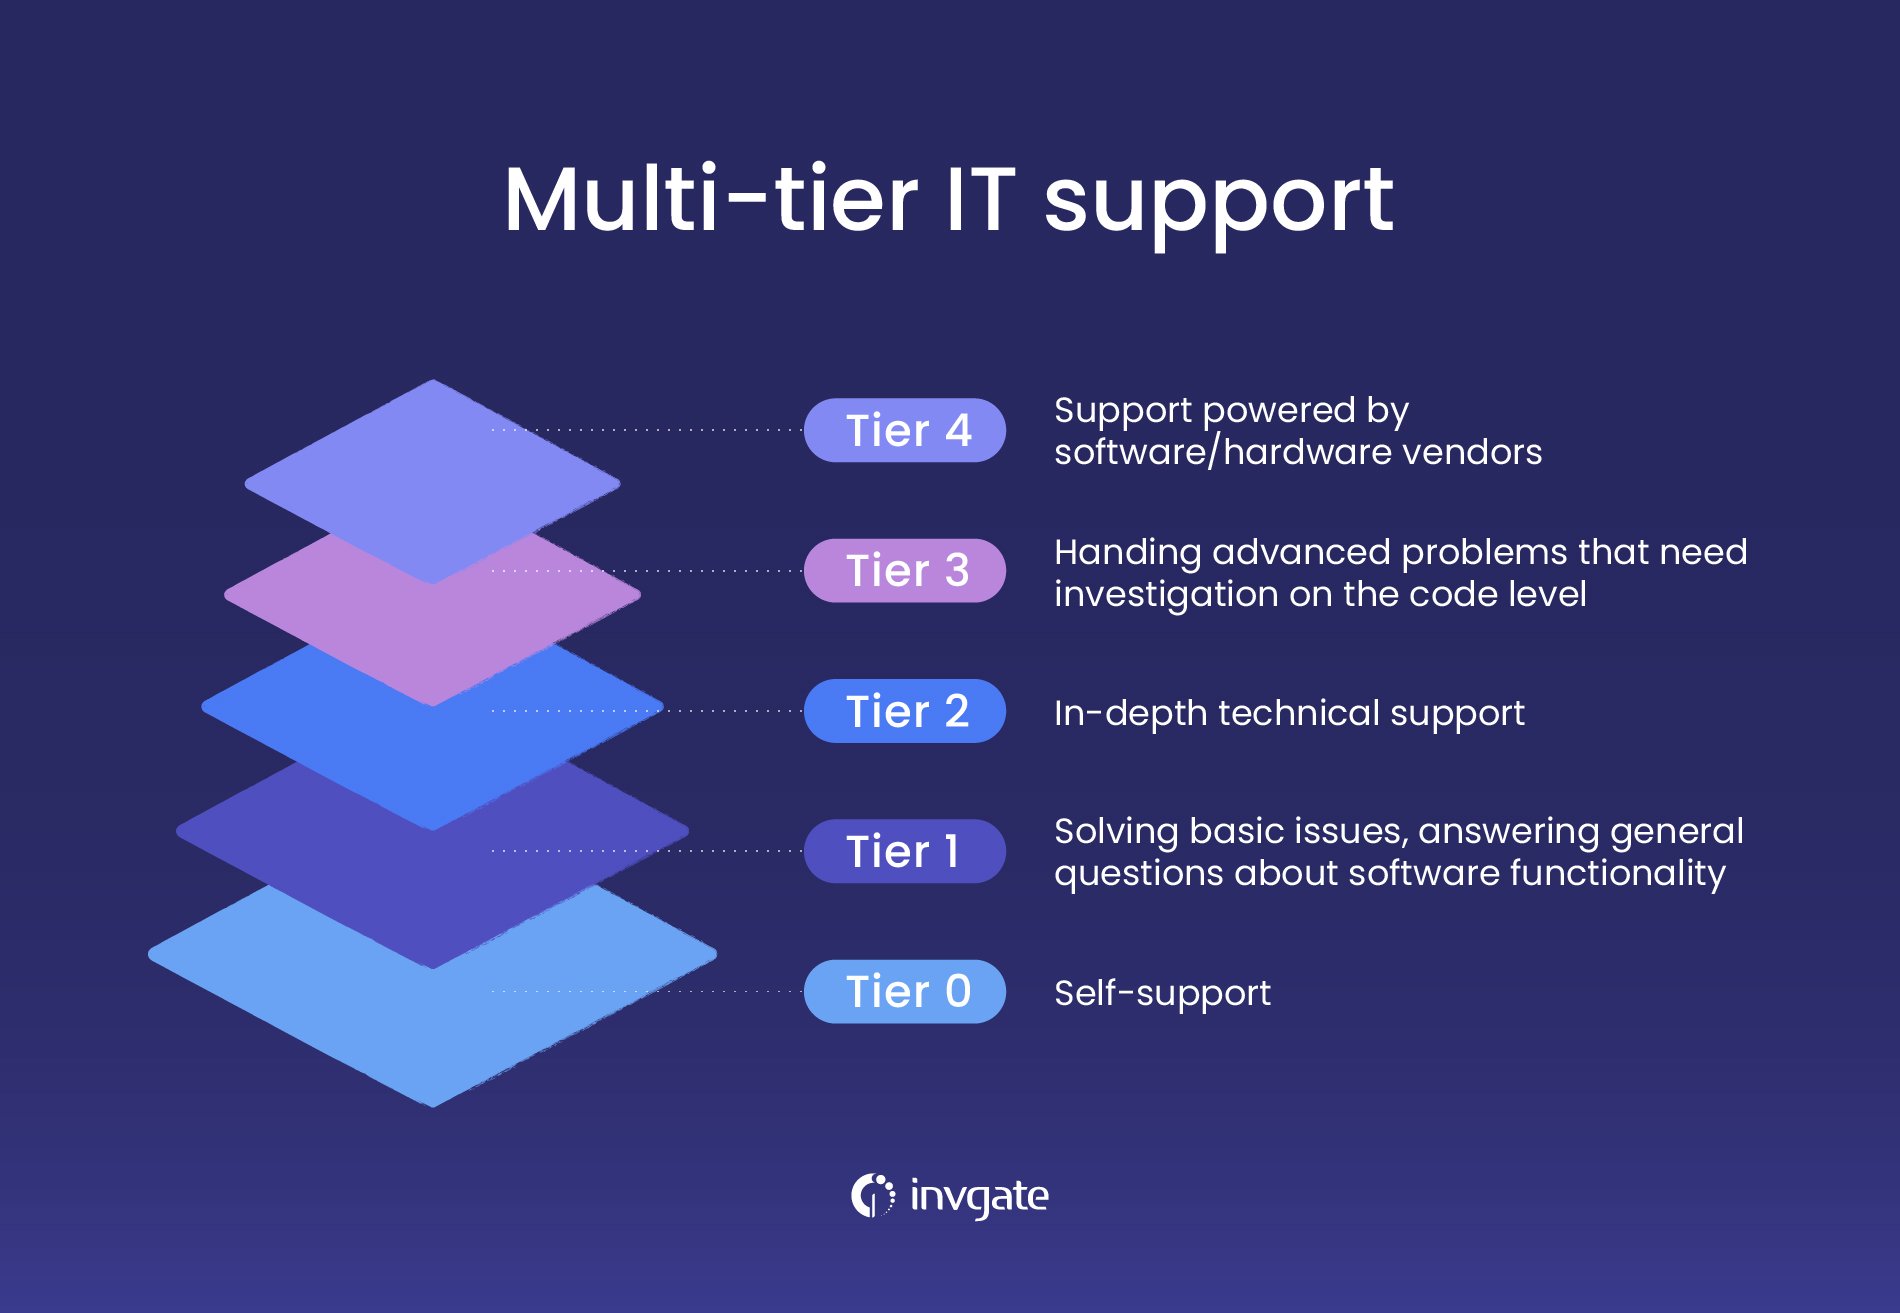 The various tiers of IT support